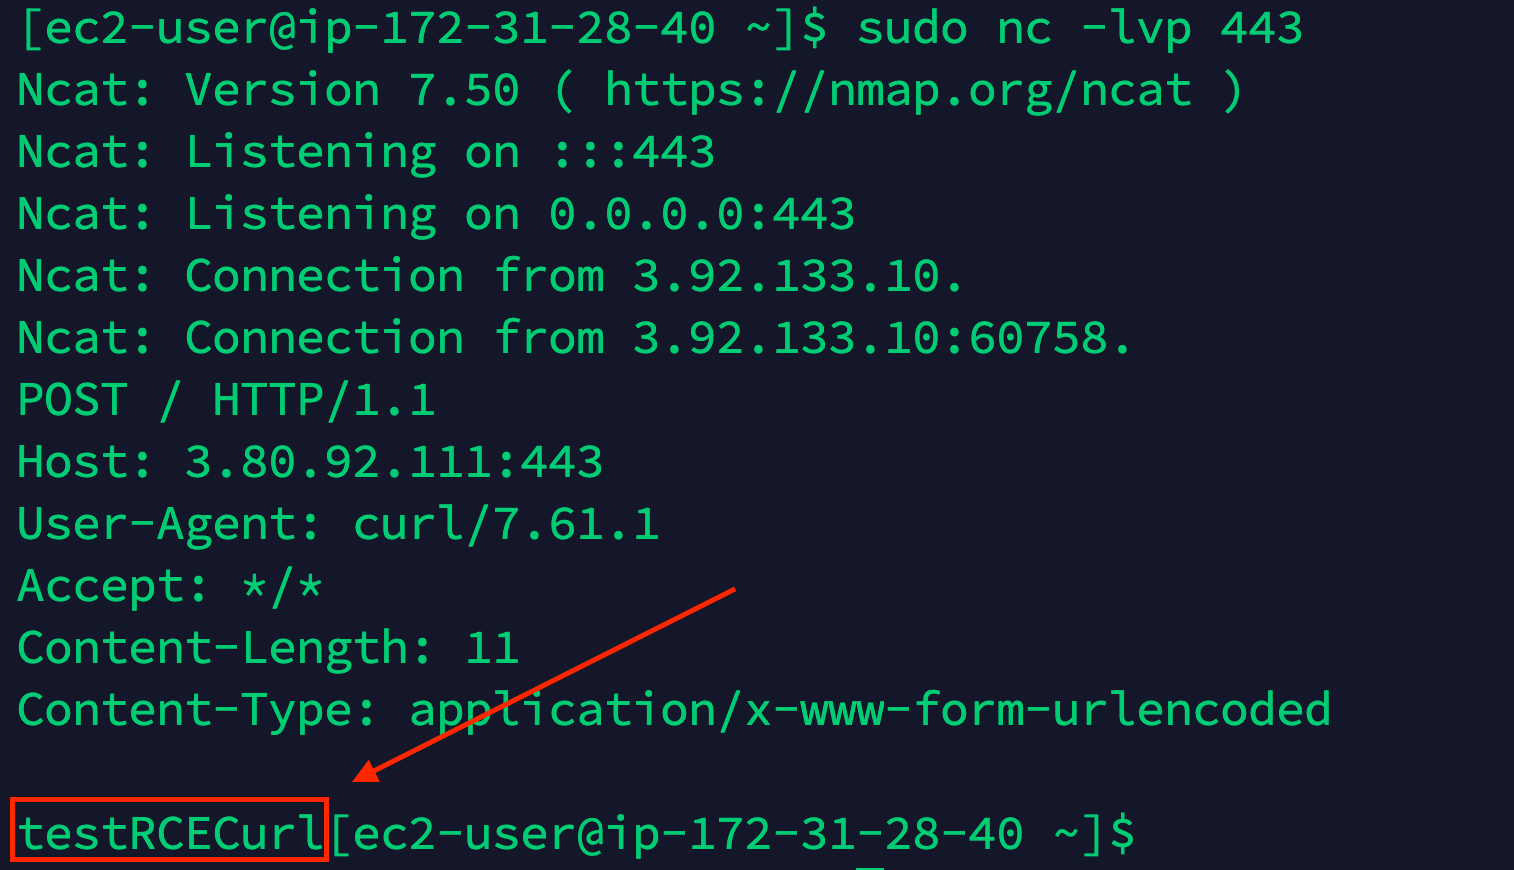  curl command to open a connection to another EC2